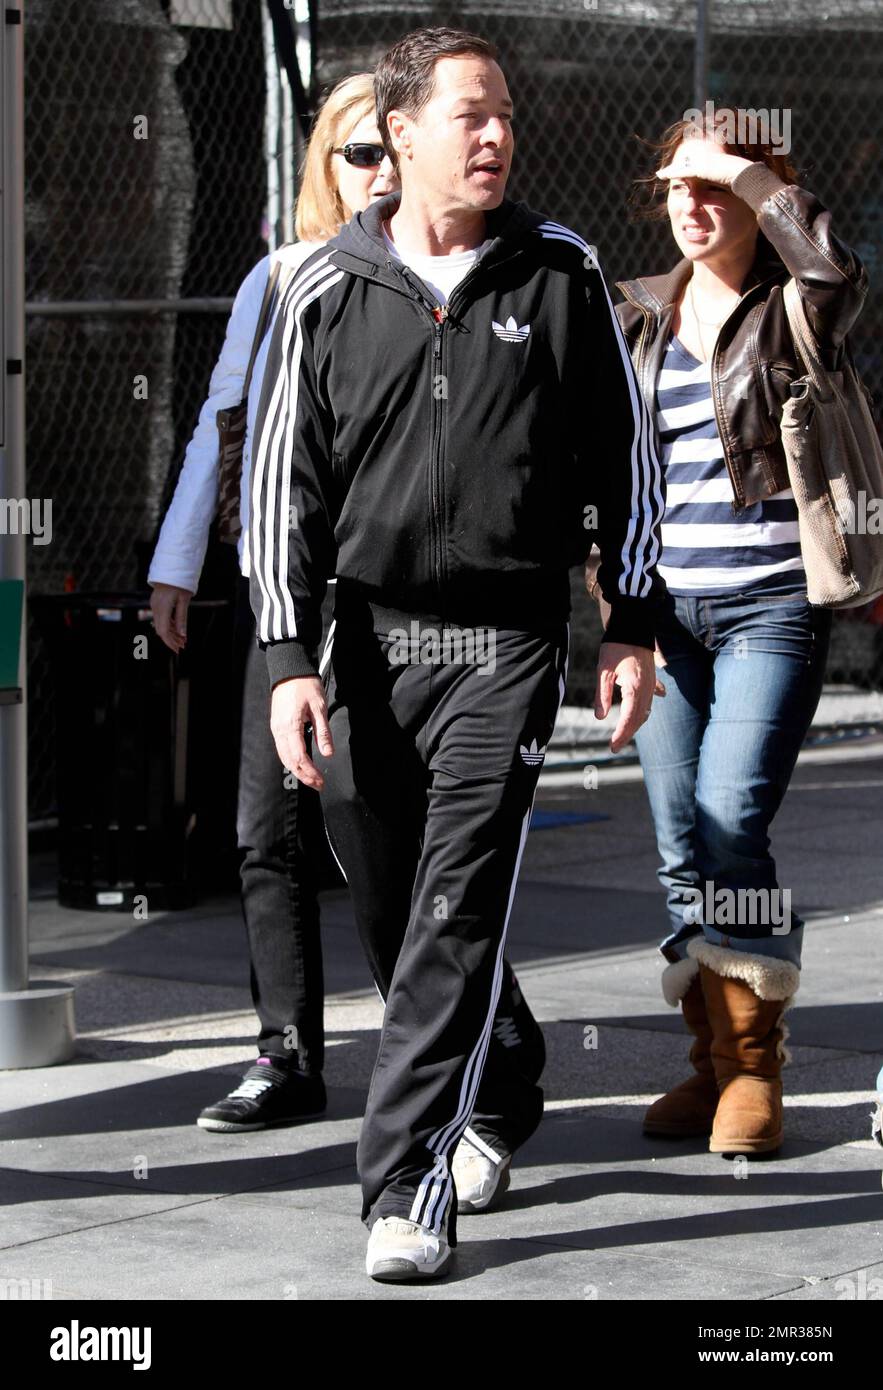 EXCLUSIVE!! Actor French Stewart was spotted out and about in downtown L.A. while wearing a black Adidas jogging suit. Los Angeles, CA. 10th November 2012. Stock Photo